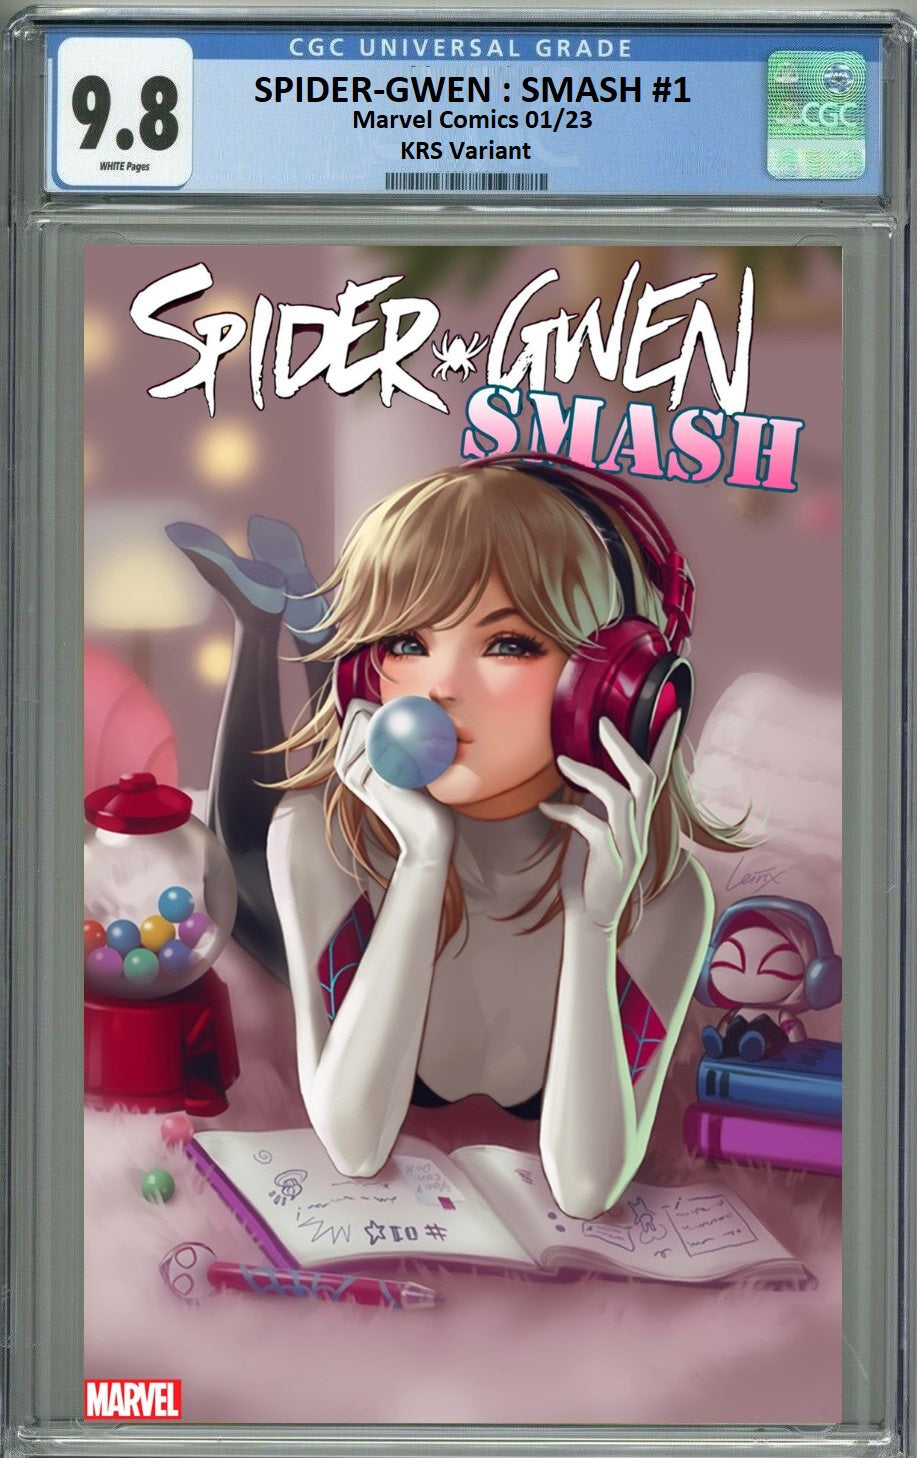 SPIDER-GWEN : SMASH #1 LEIRIX VARIANT LIMITED TO 500 COPIES WITH NUMBERED COA CGC 9.8 PREORDER